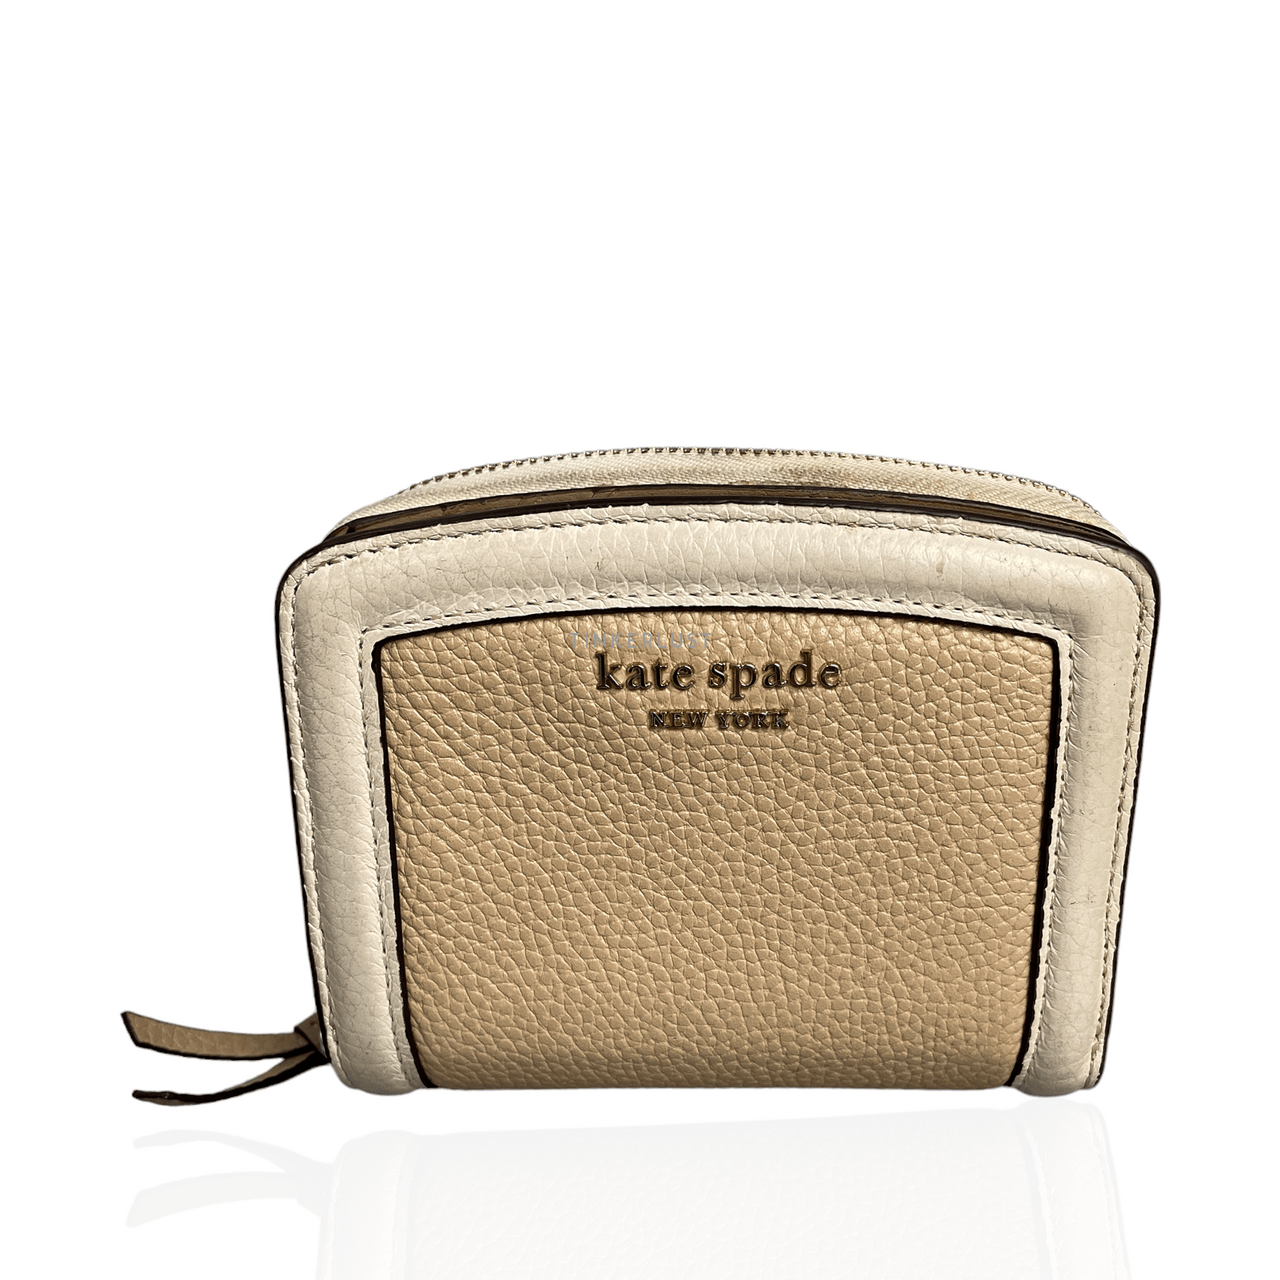 Kate Spade Knott Colorblocked Beige Small Compact Wallet